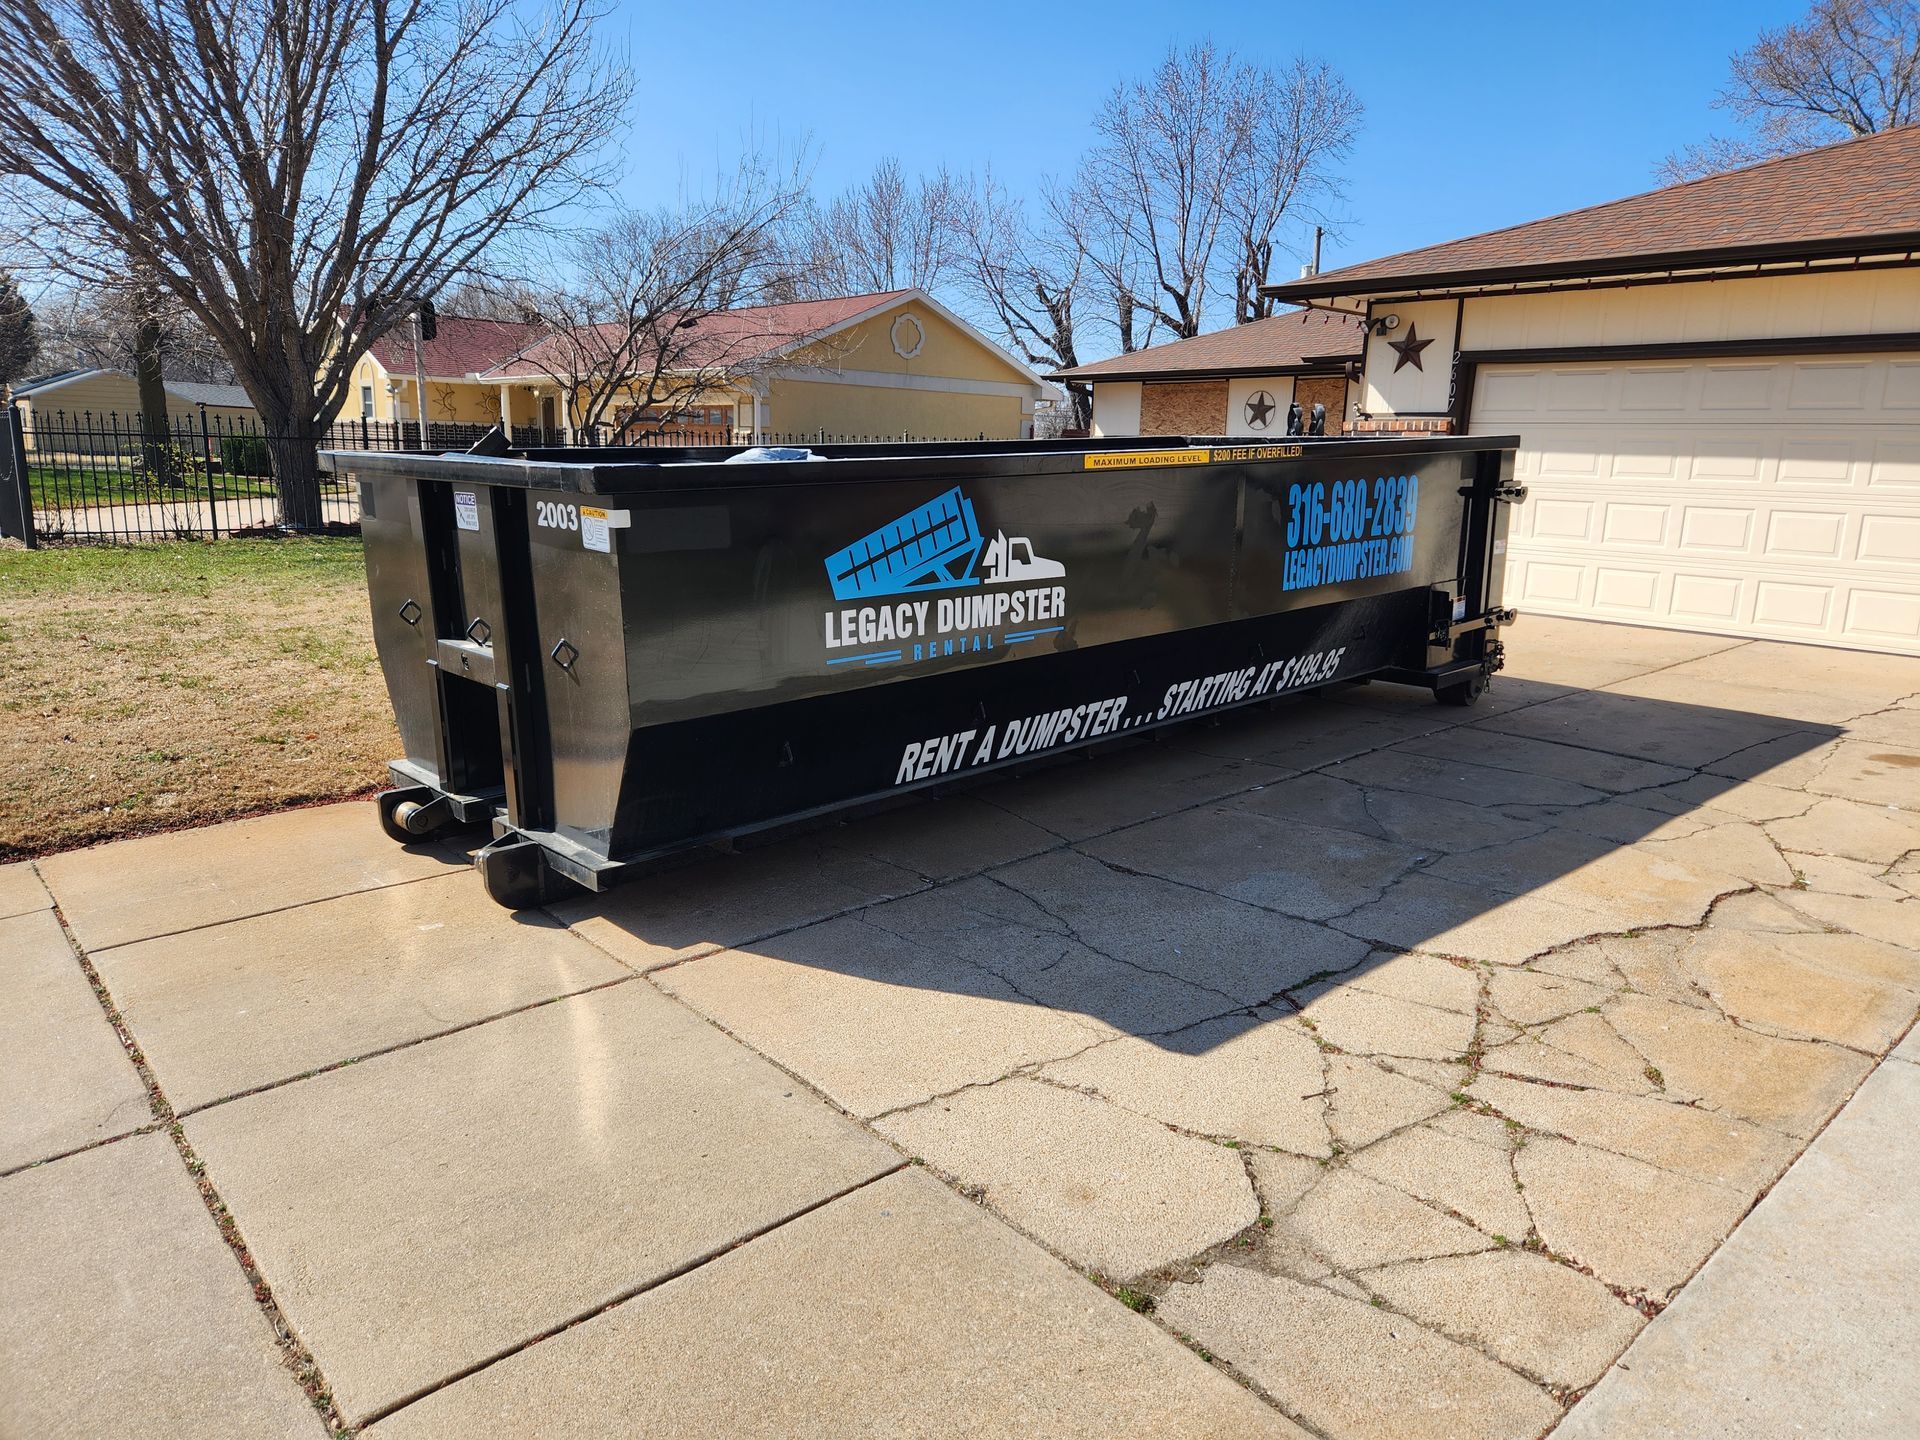 A 20 yard dumpster is parked in front of a house in wichita, KS.